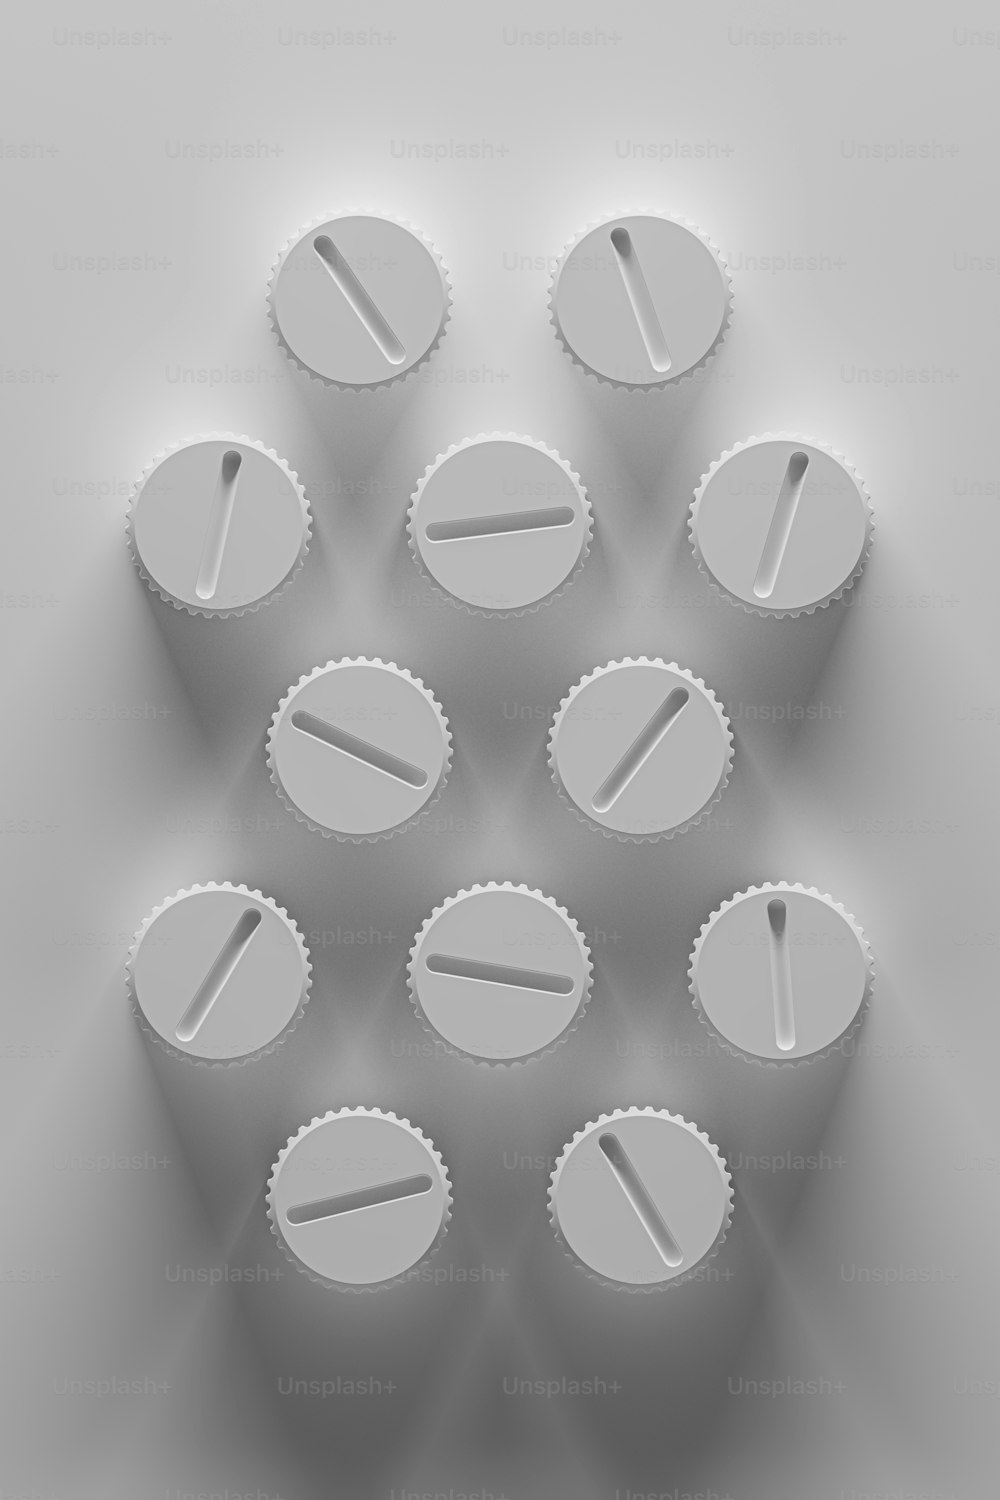 a group of white round objects sitting on top of a table